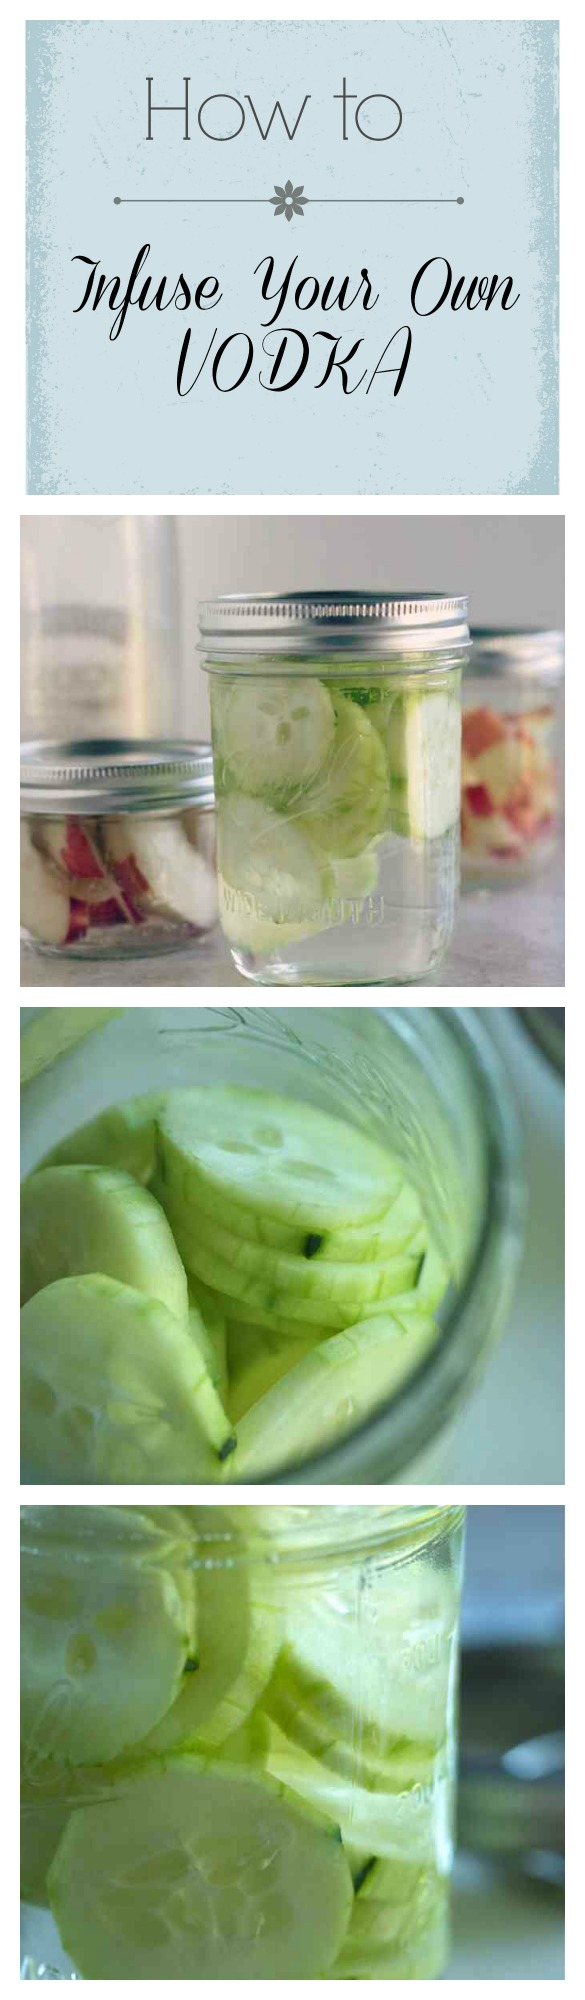 How to Infuse Your Own Vodka